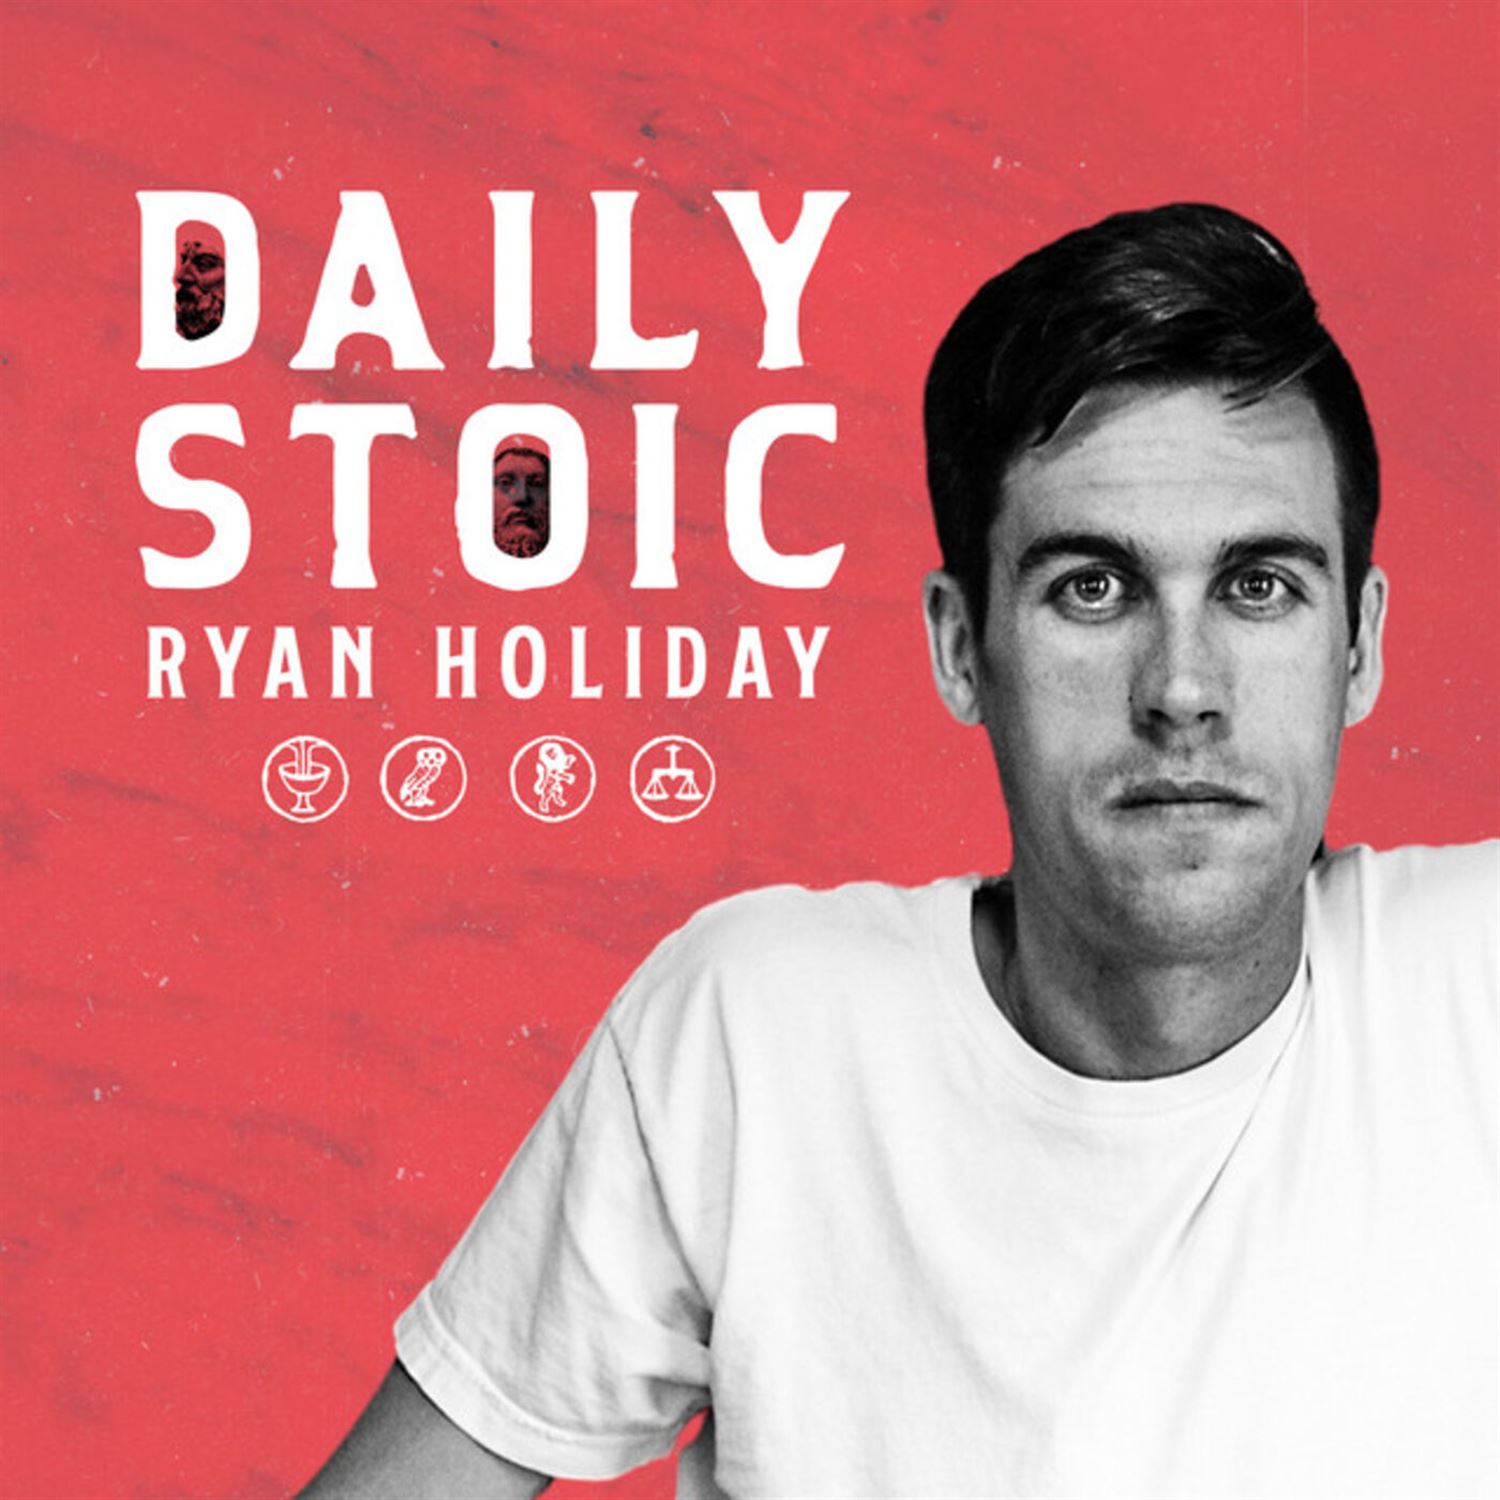 But Ryan Holiday's are worse!